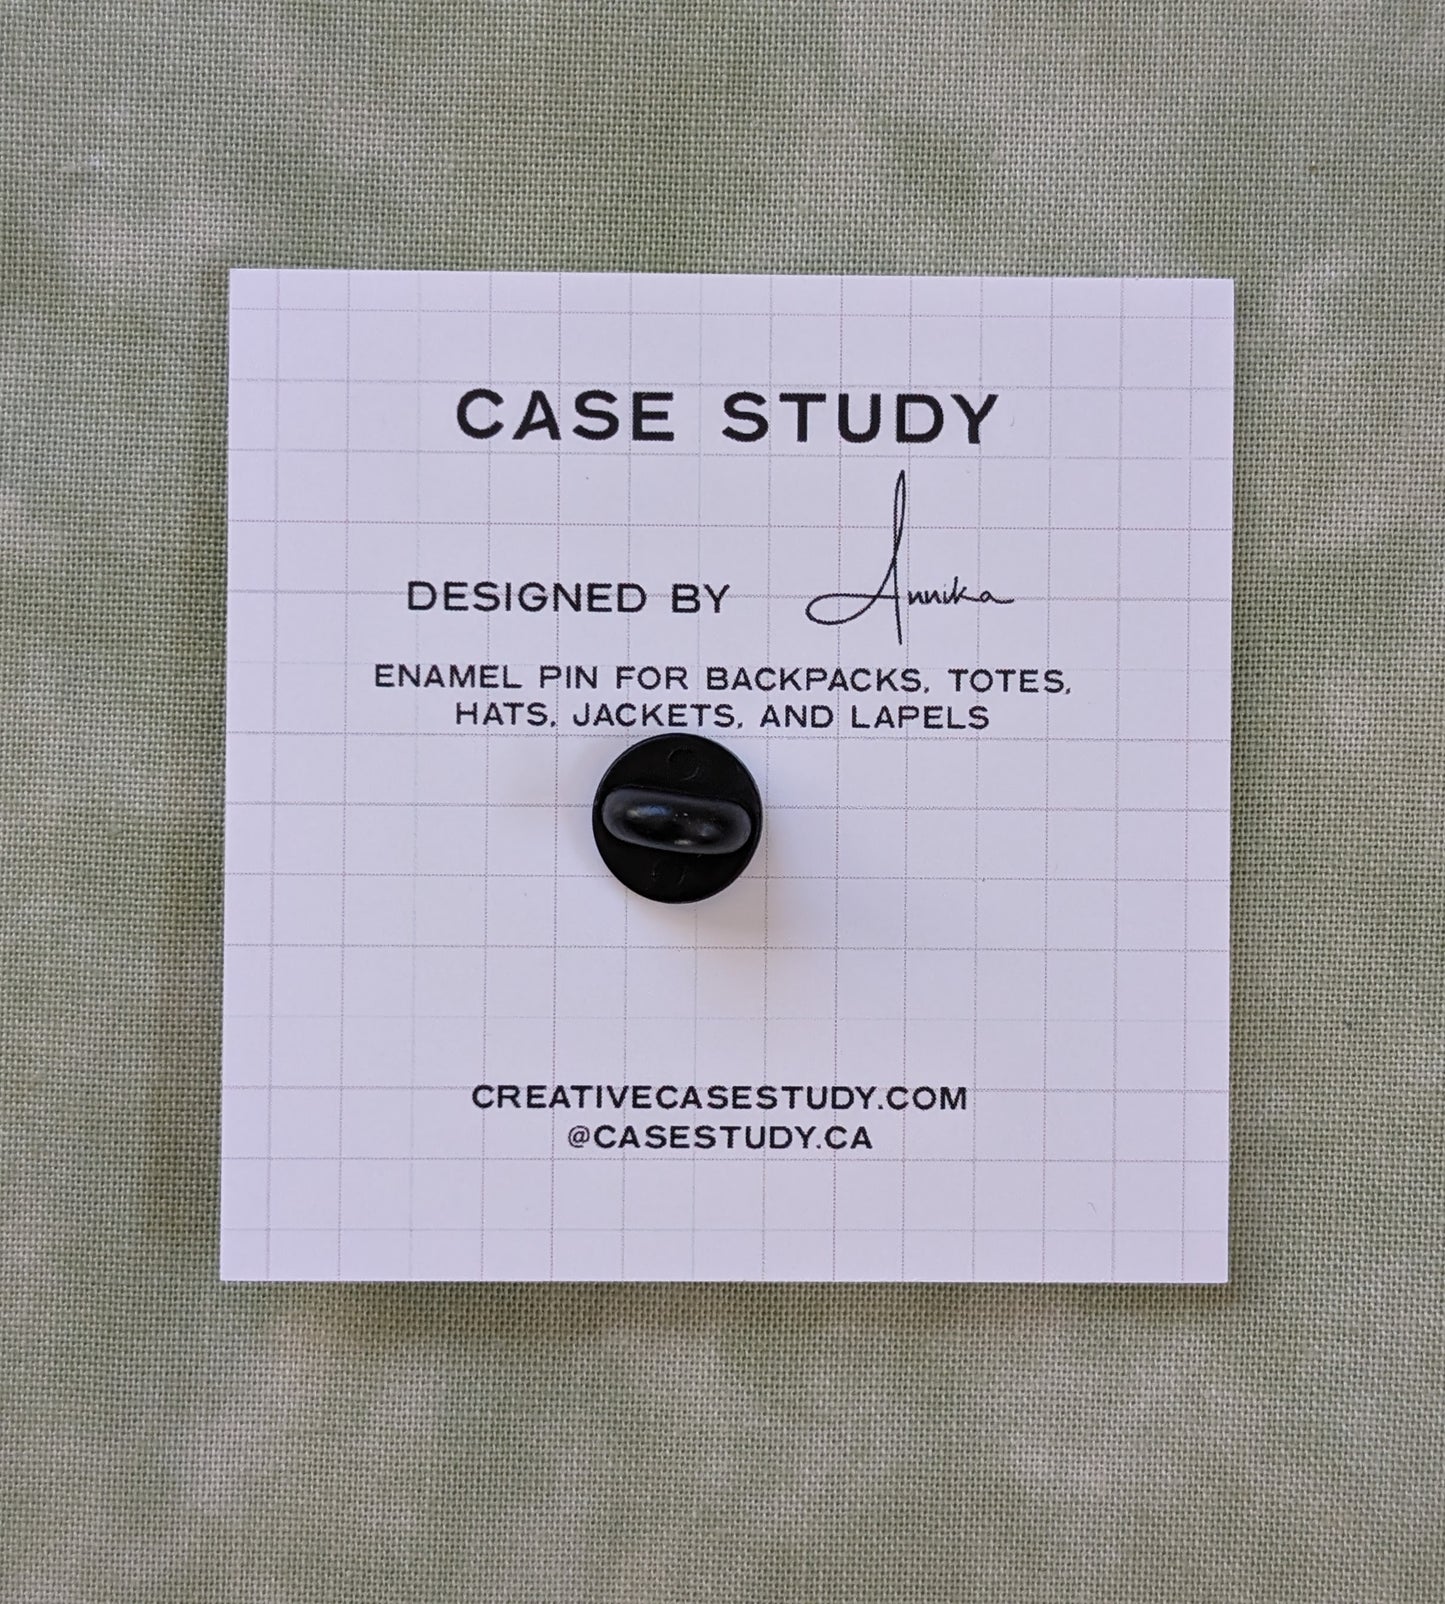 Pin Back with details about the maker, Case Study